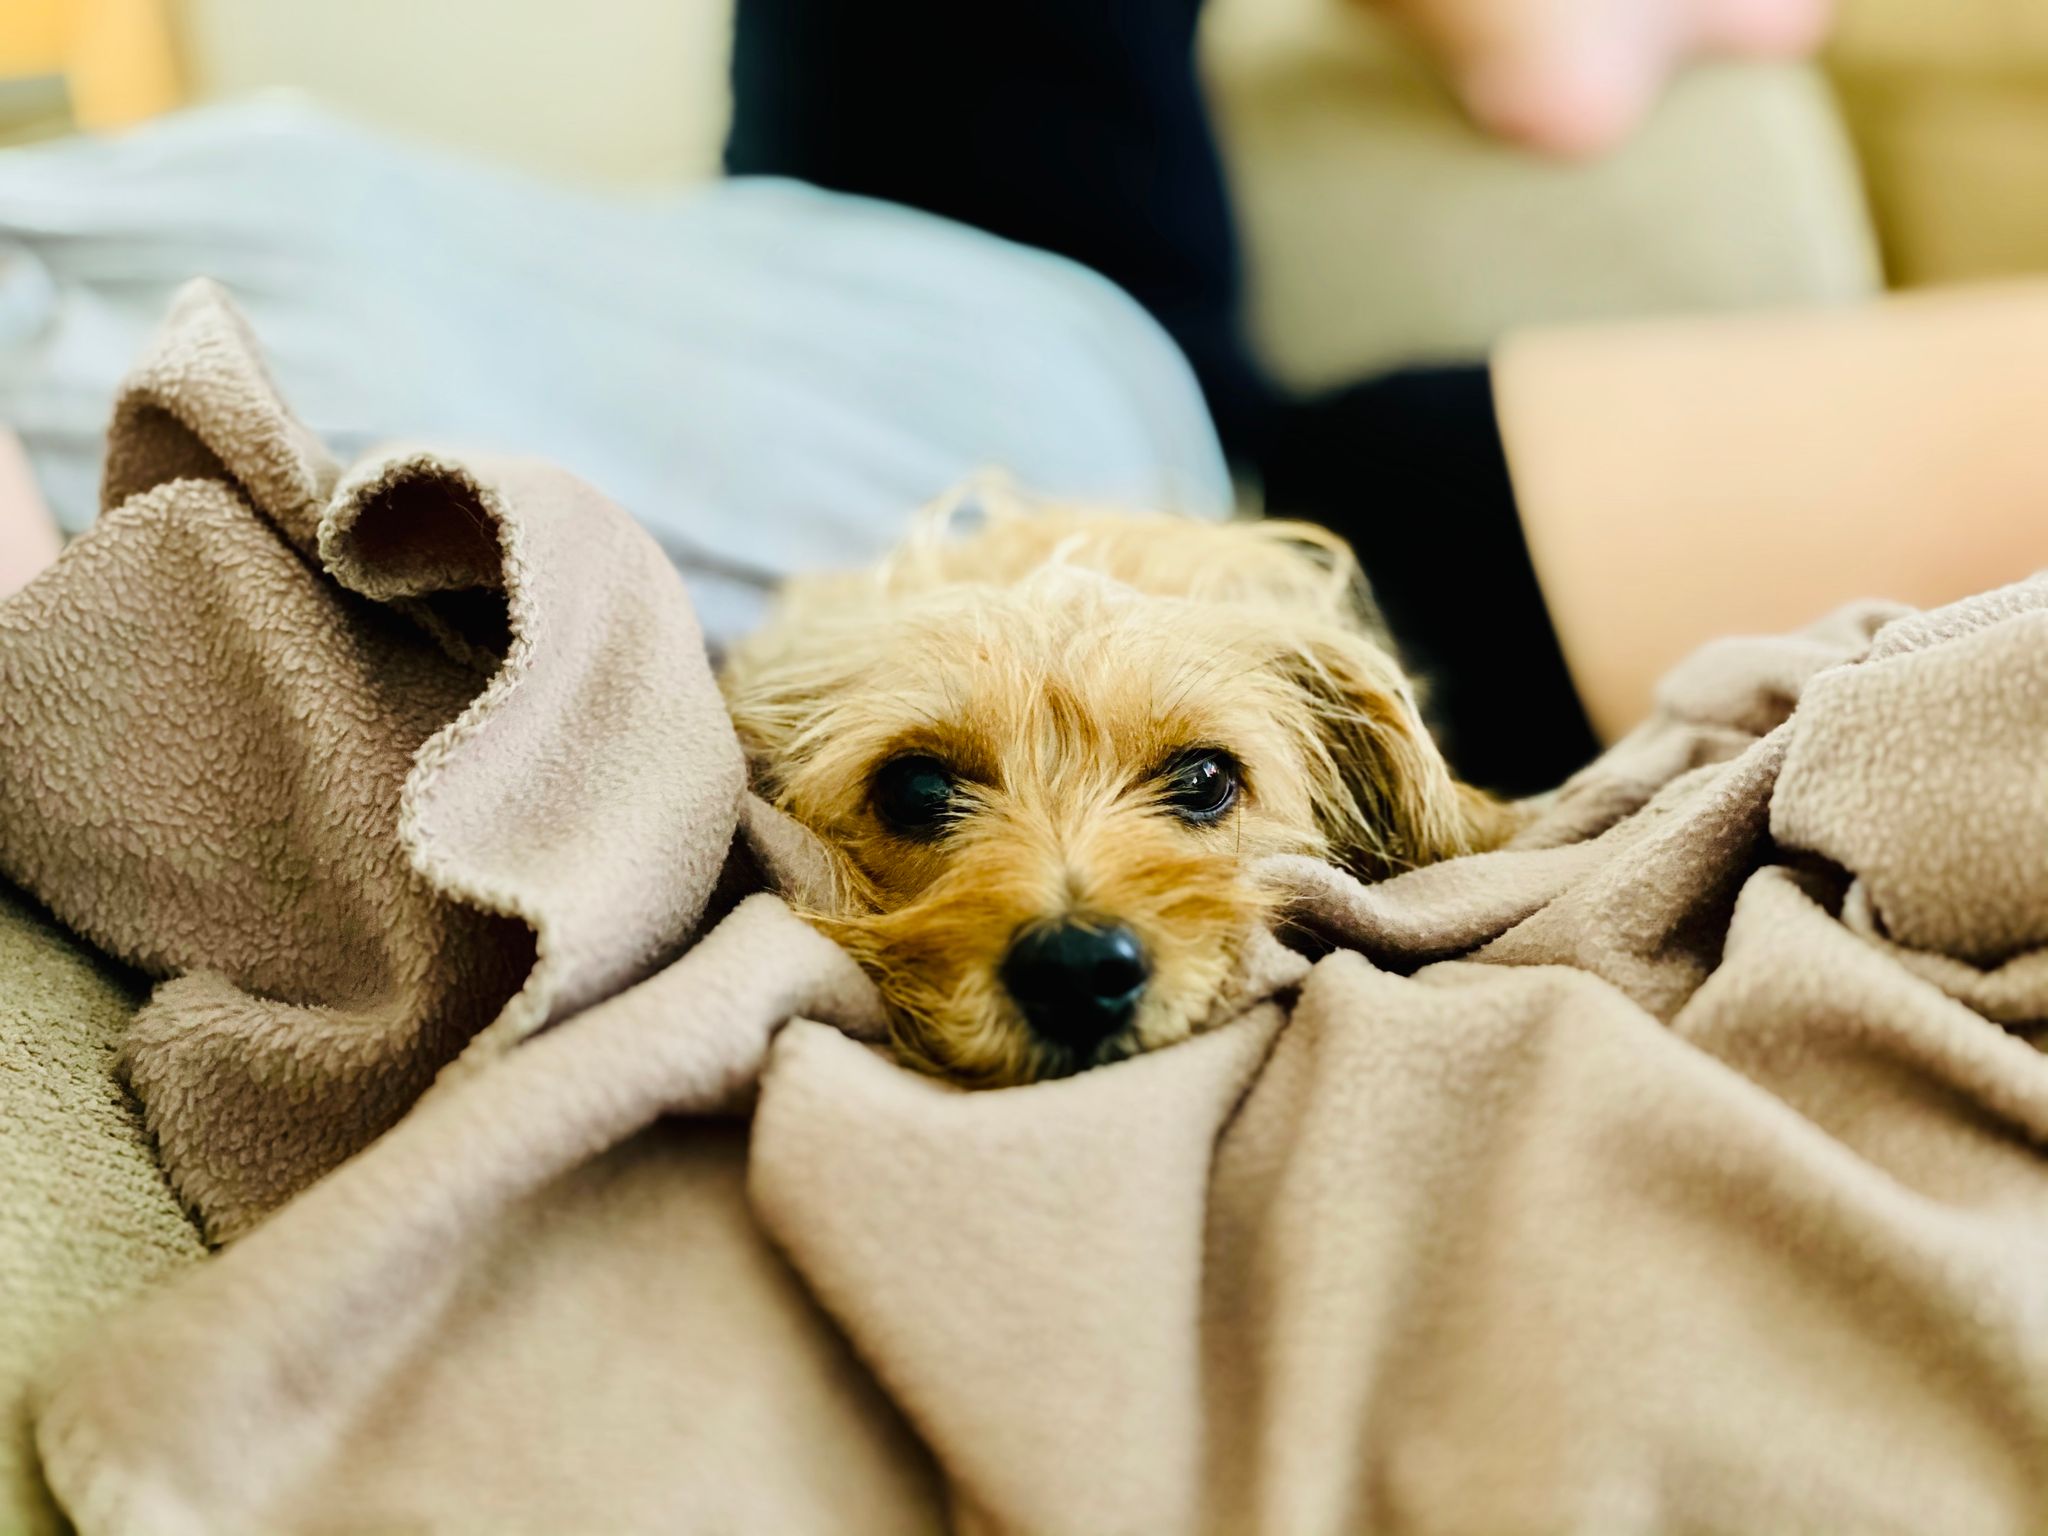 A photo of the same small scruffy blonde dog with his head resting on the blanket, looking quite sleepy.